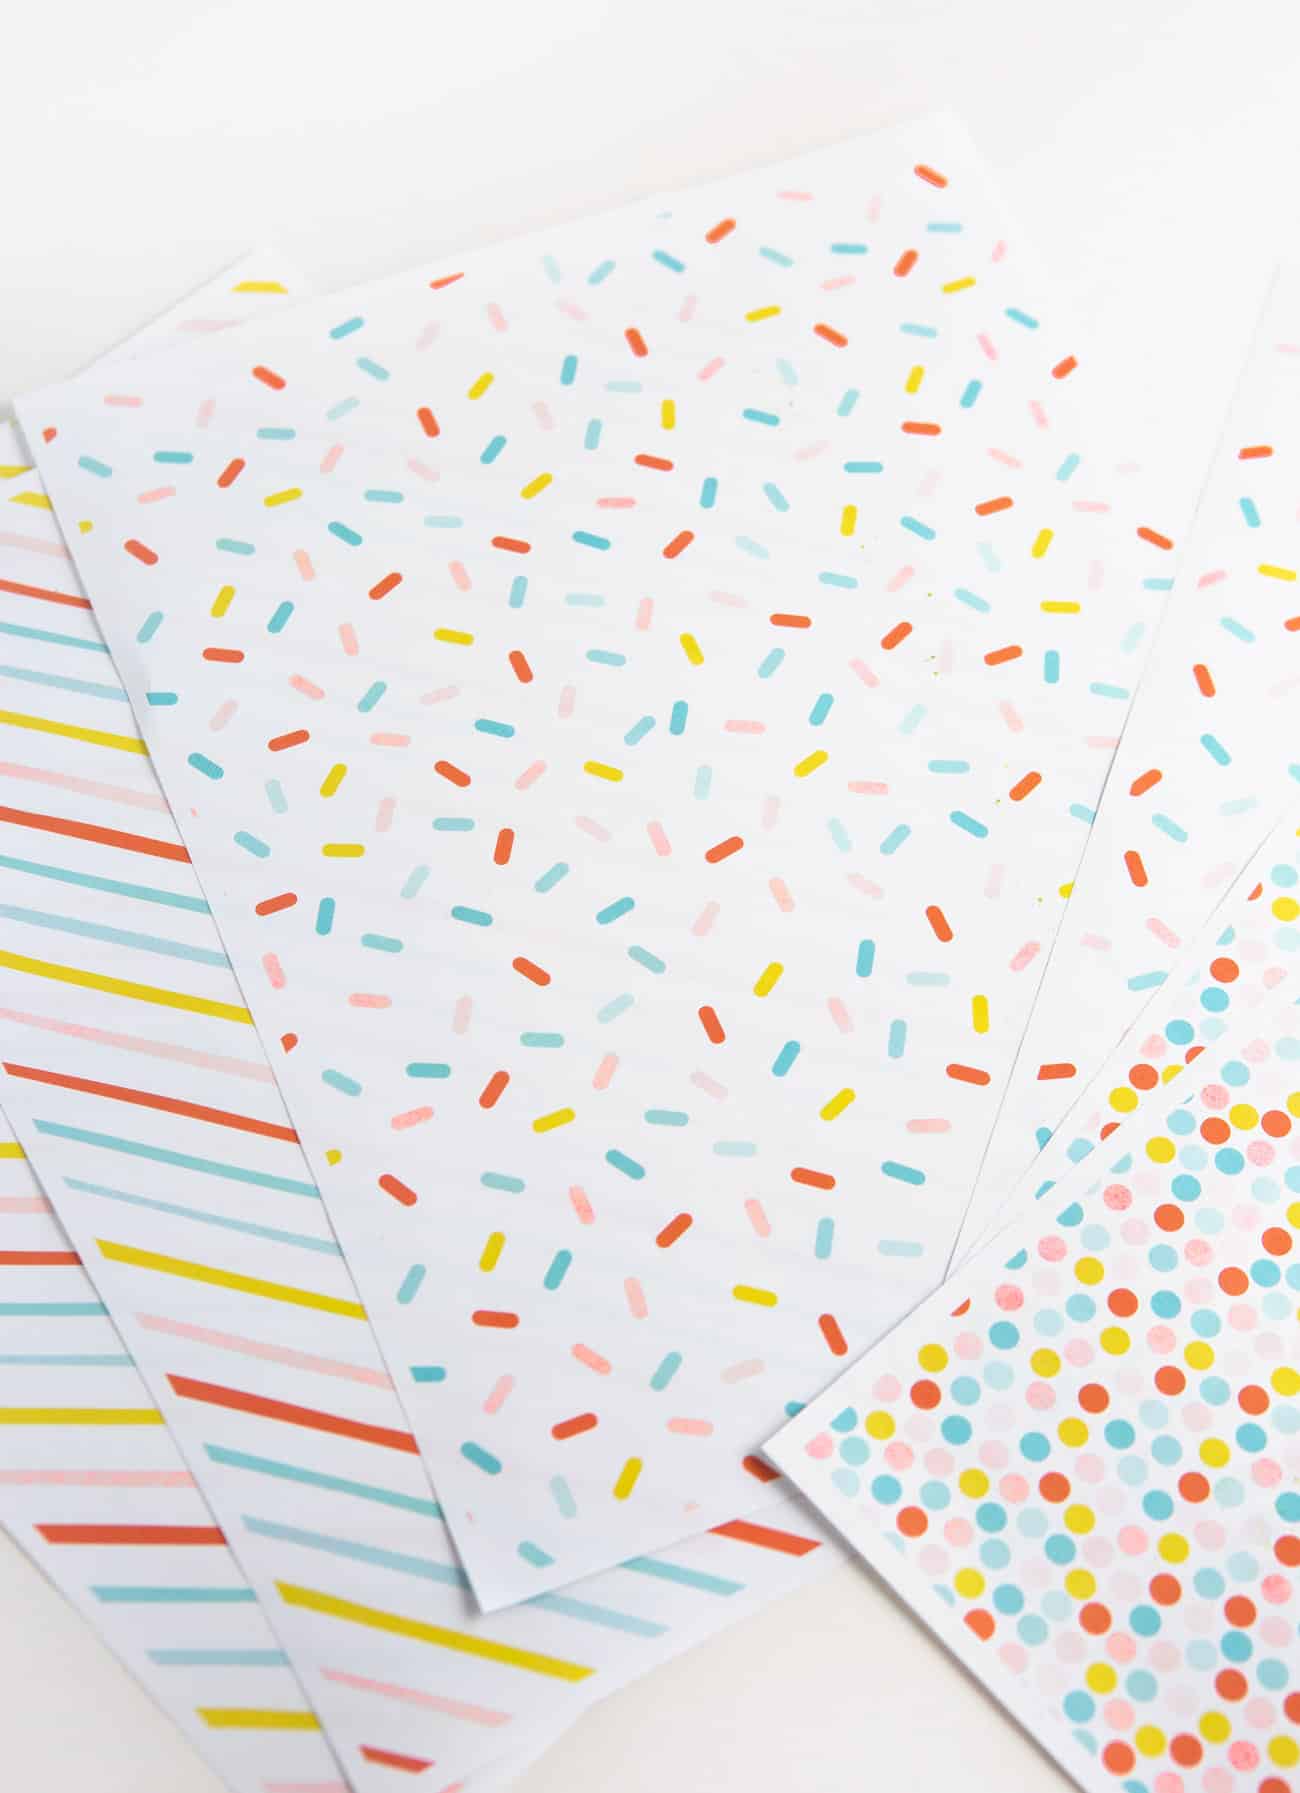 Free printable birthday wrapping paper gift box with blue yay tag and pink pom pom. Patterns include rainbow polka dot, rainbow sprinkle, and rainbow stripe.